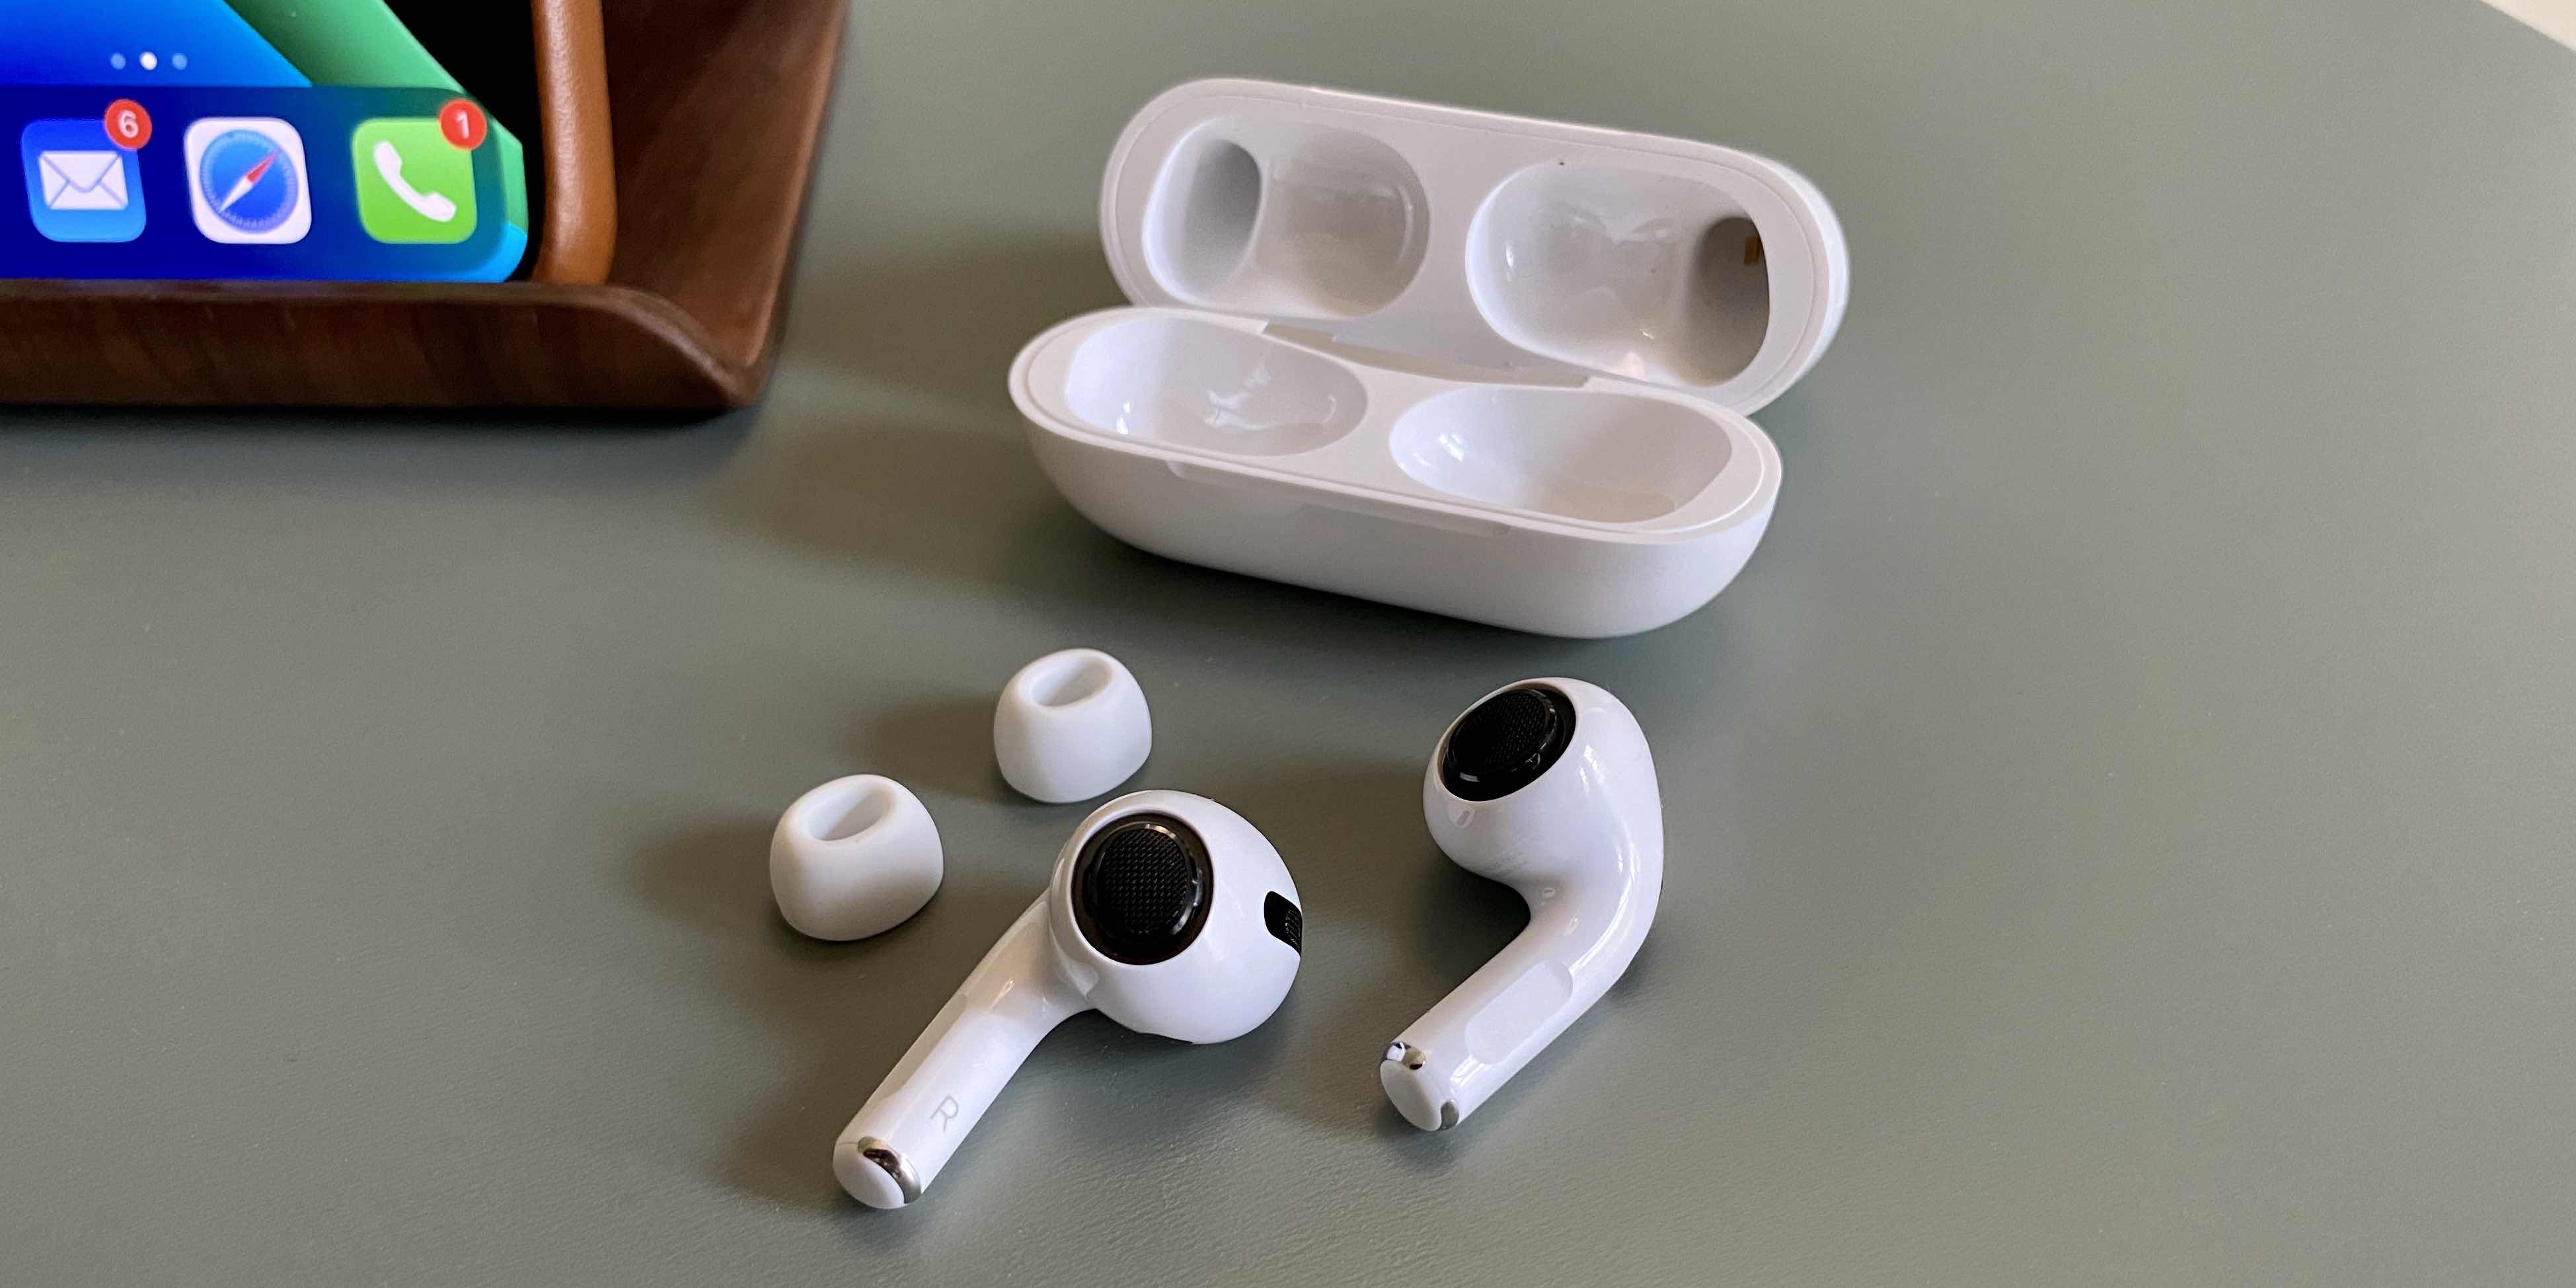 Clean AirPods Pro: What to use, how, and what to avoid - 9to5Mac